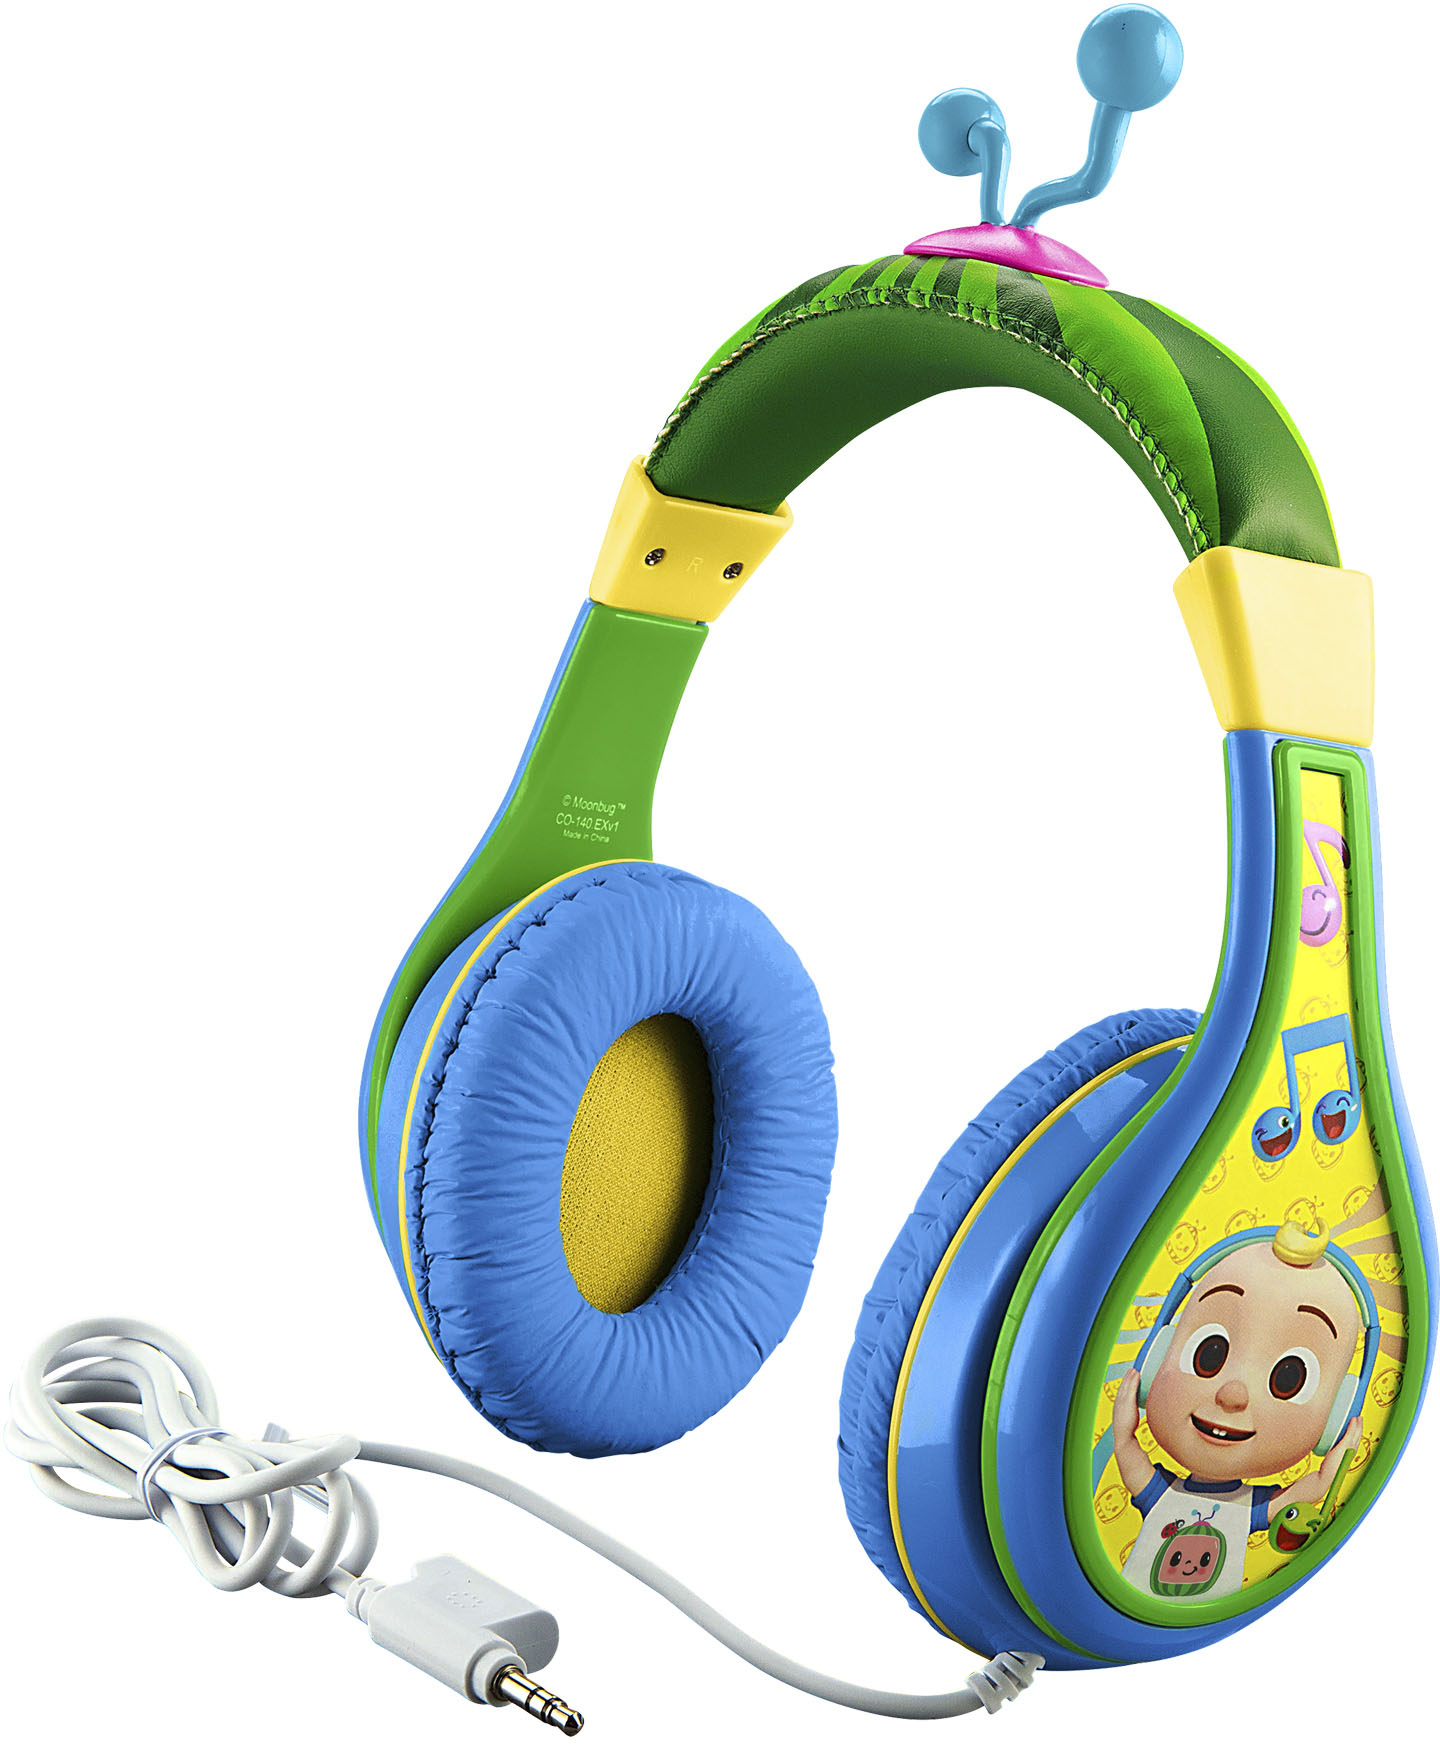 Angle View: eKids - CoComelon Wired Over-the-Ear Headphones - Green